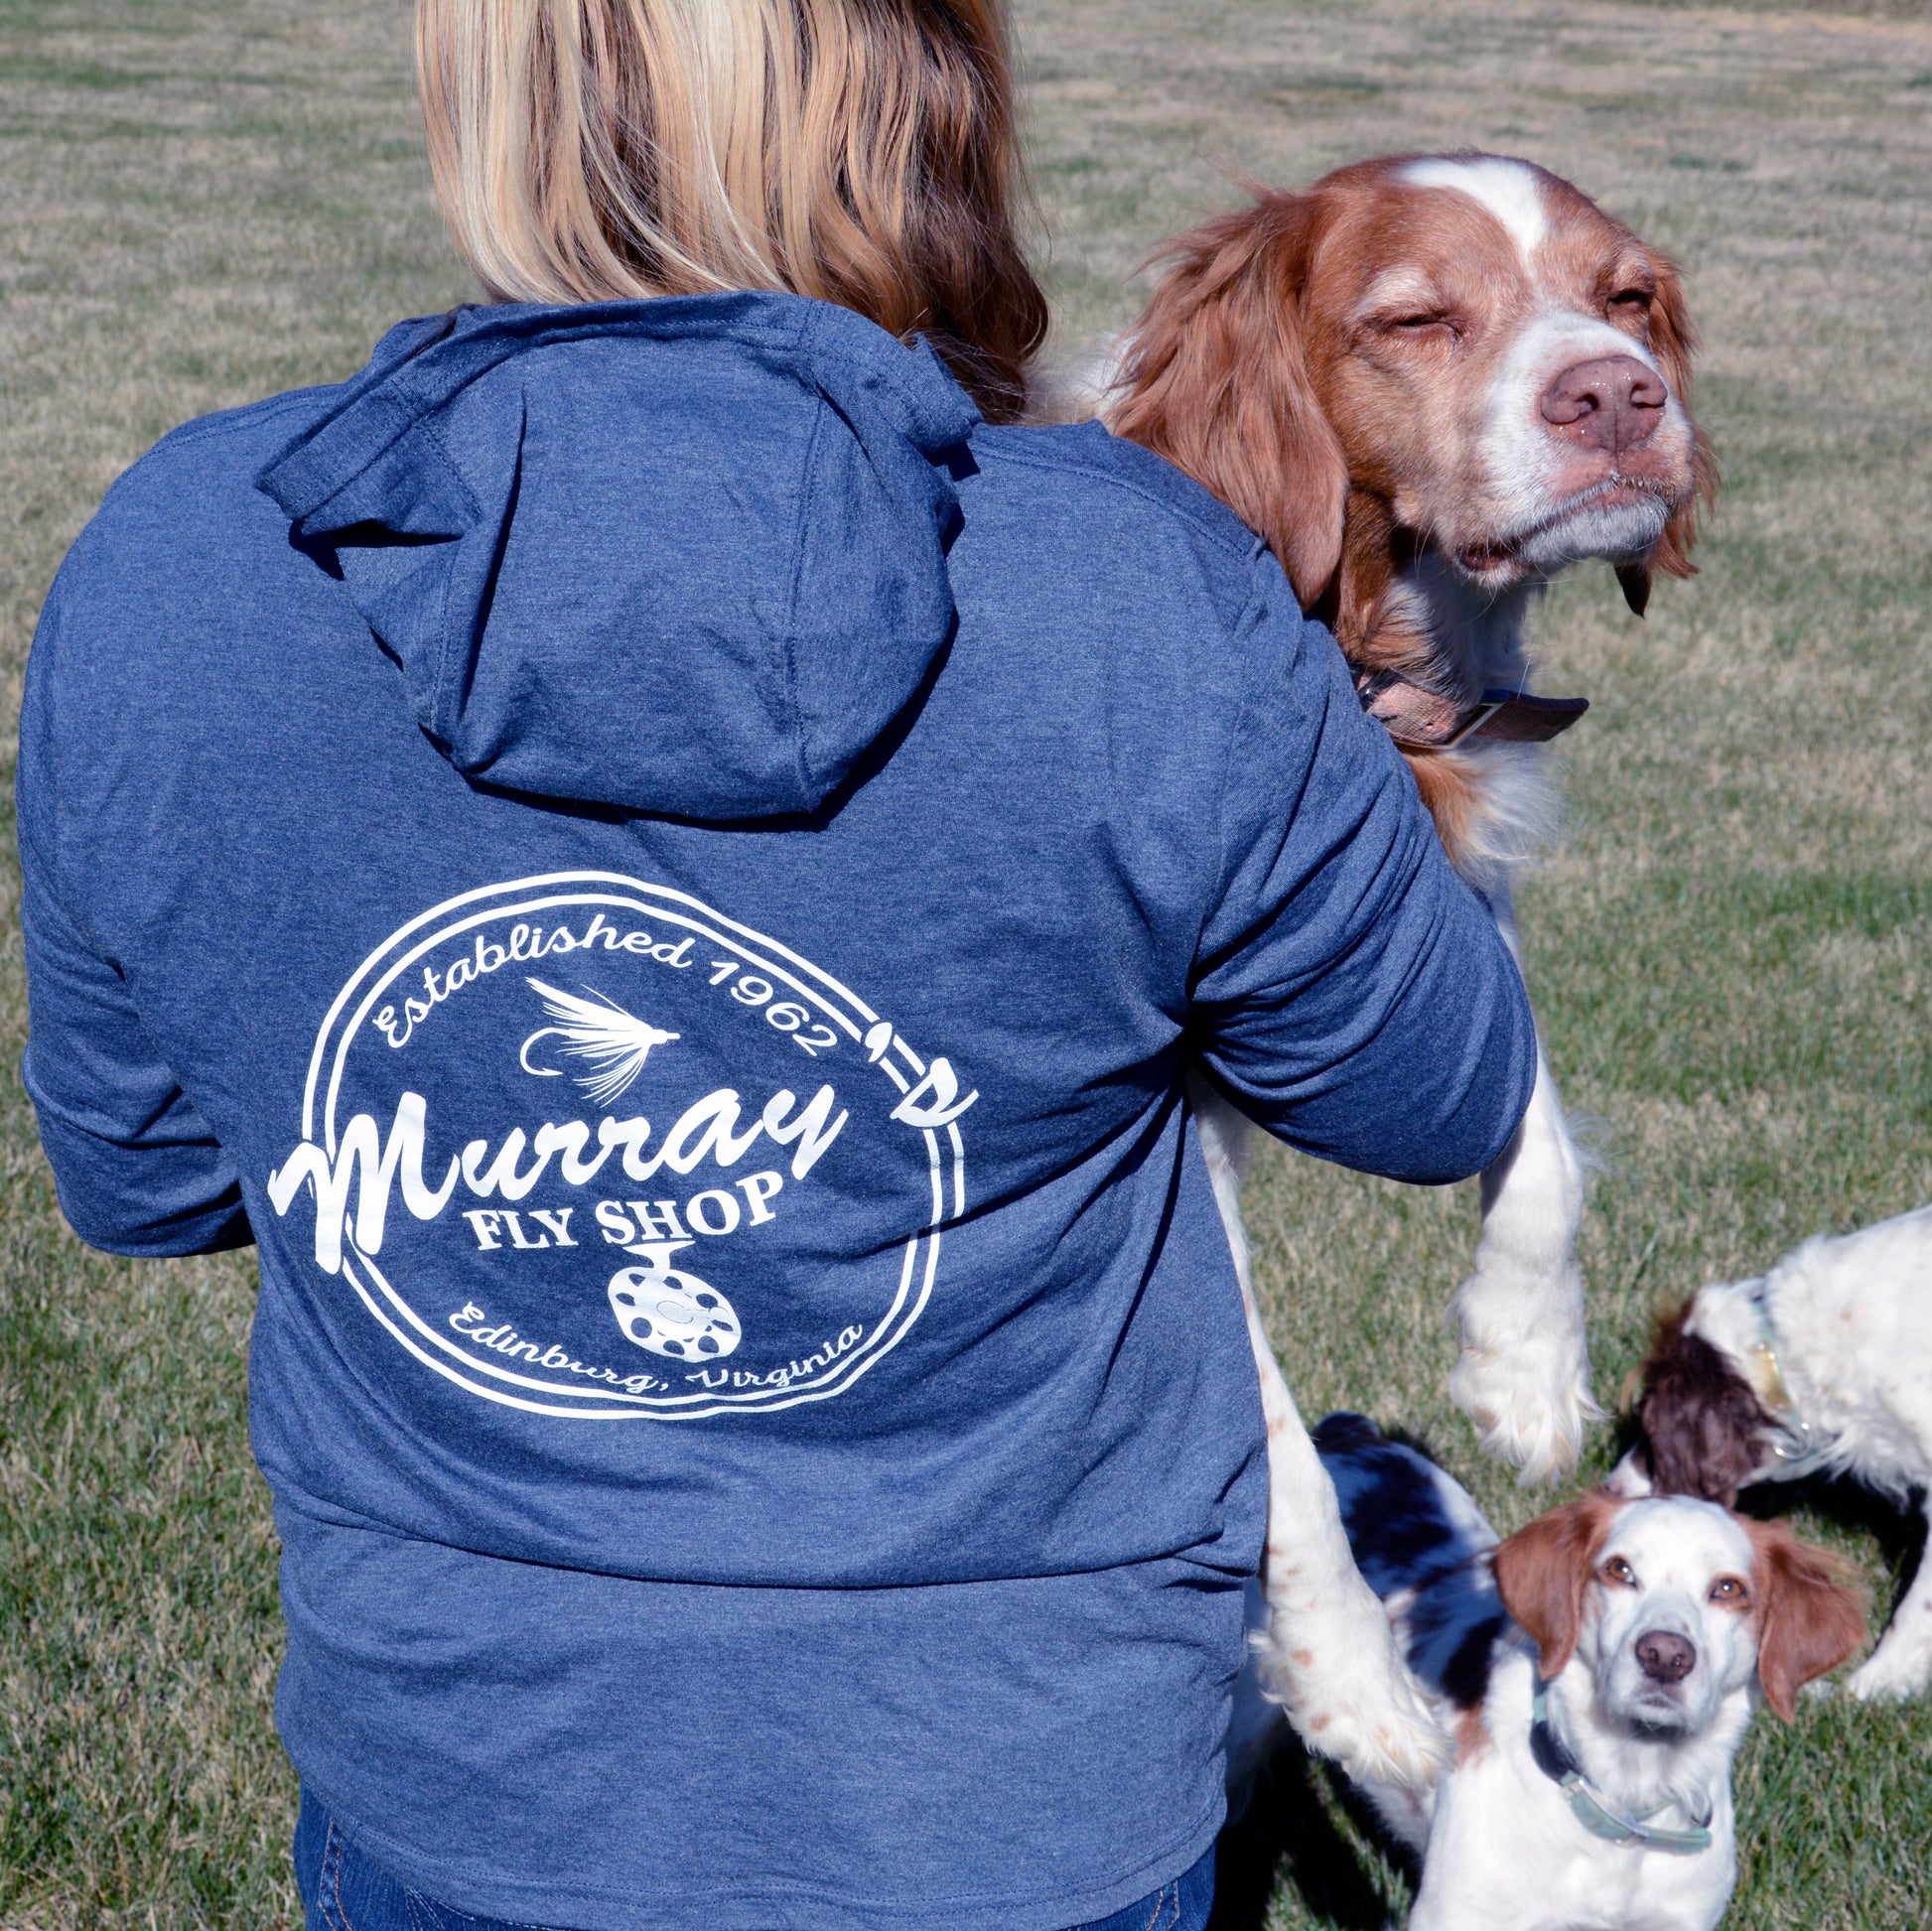 Frost Blue - Pictured is a girl wearing a Frost Blue Murray's Fly Shop Hooded long sleeve sun shirt.  Also pictured are three Brittany Spaniel dogs.